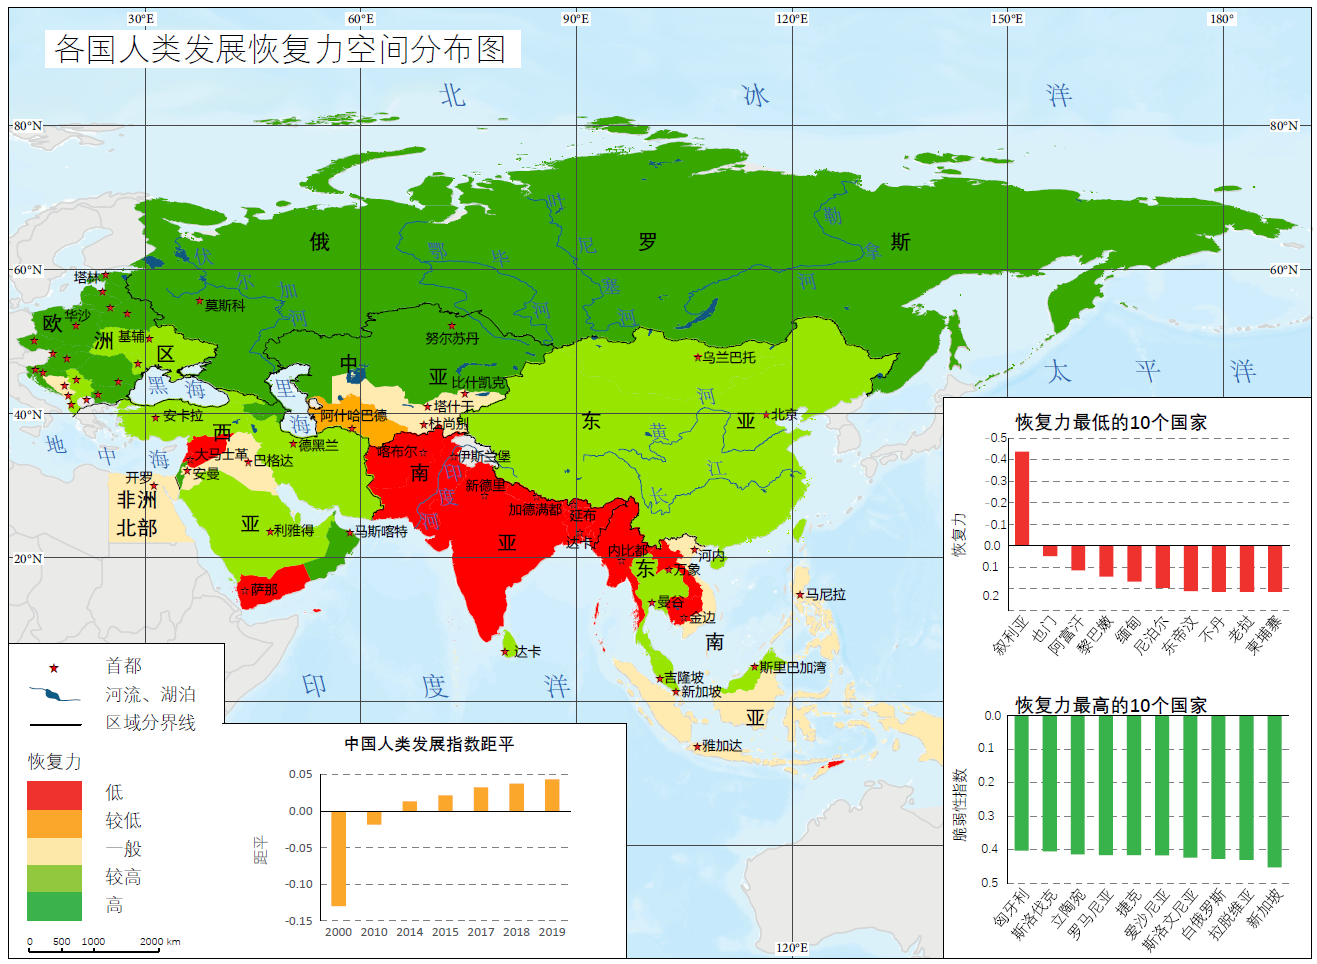 Human development resilience dataset for countries along the "Belt and Road" (2000-2020)